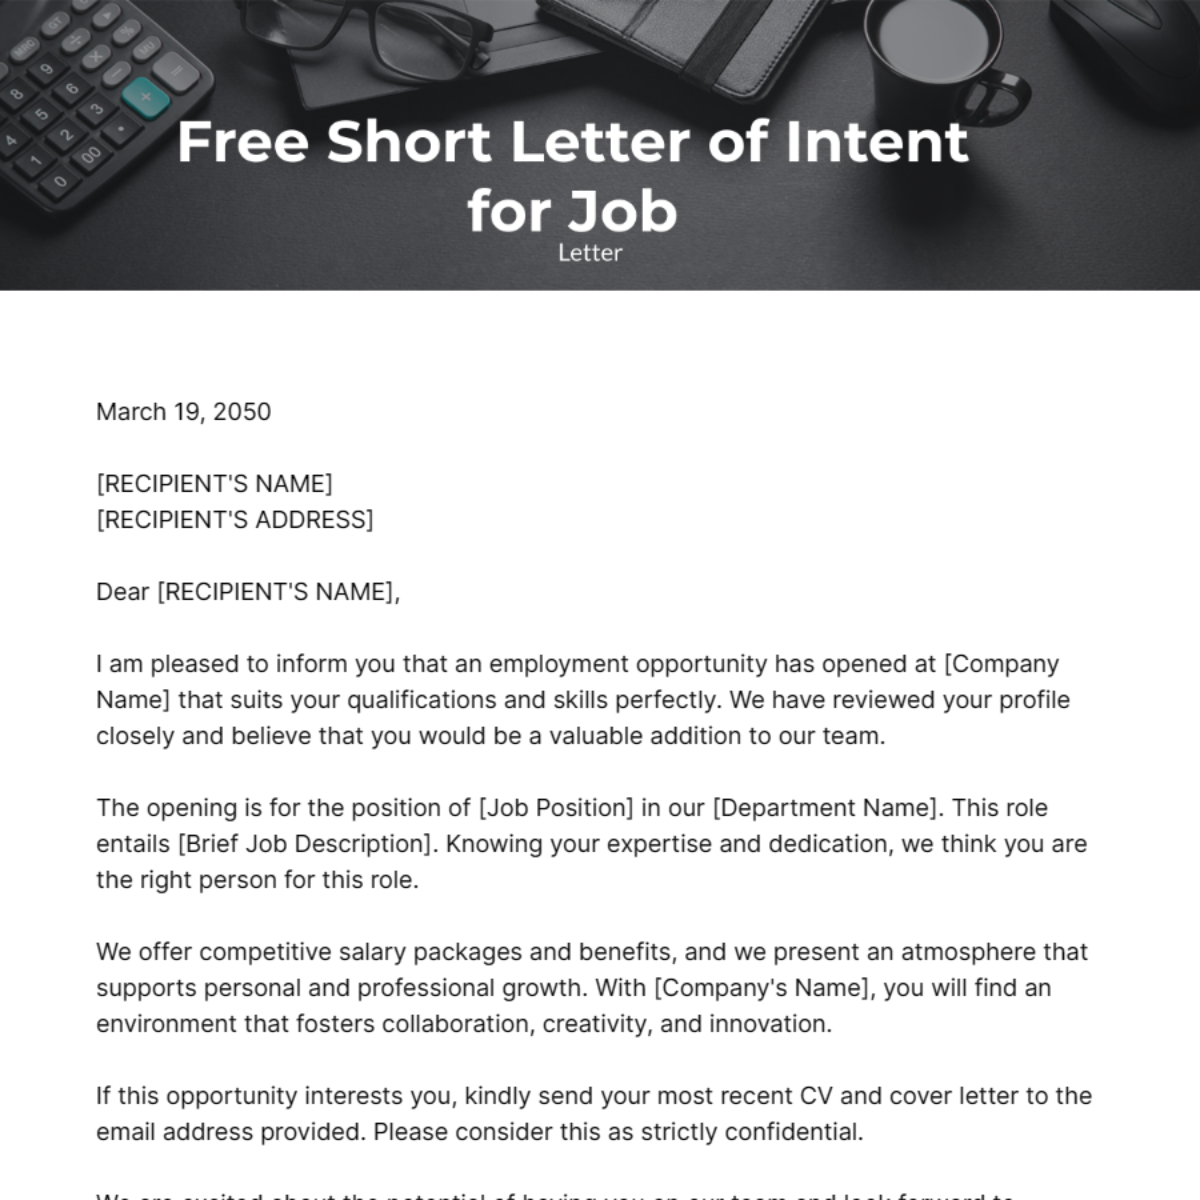 Short Letter of Intent for Job Template